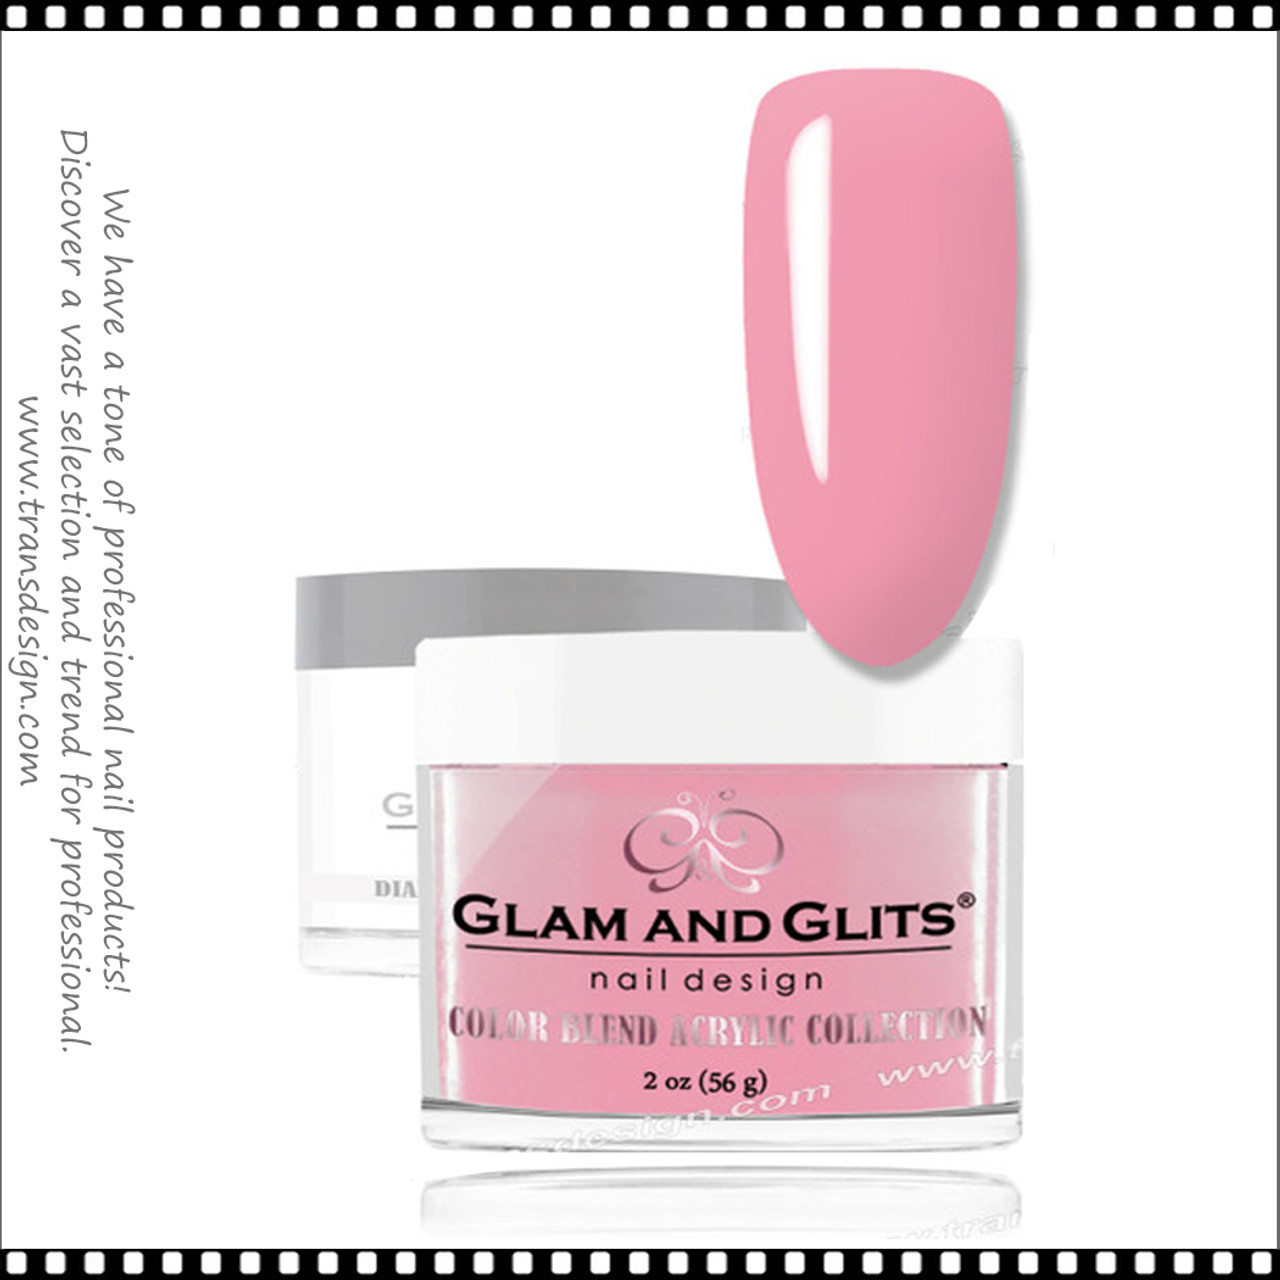 Glam and Glits BLEND Ombre Acrylic Marble Nail Powder 2 oz